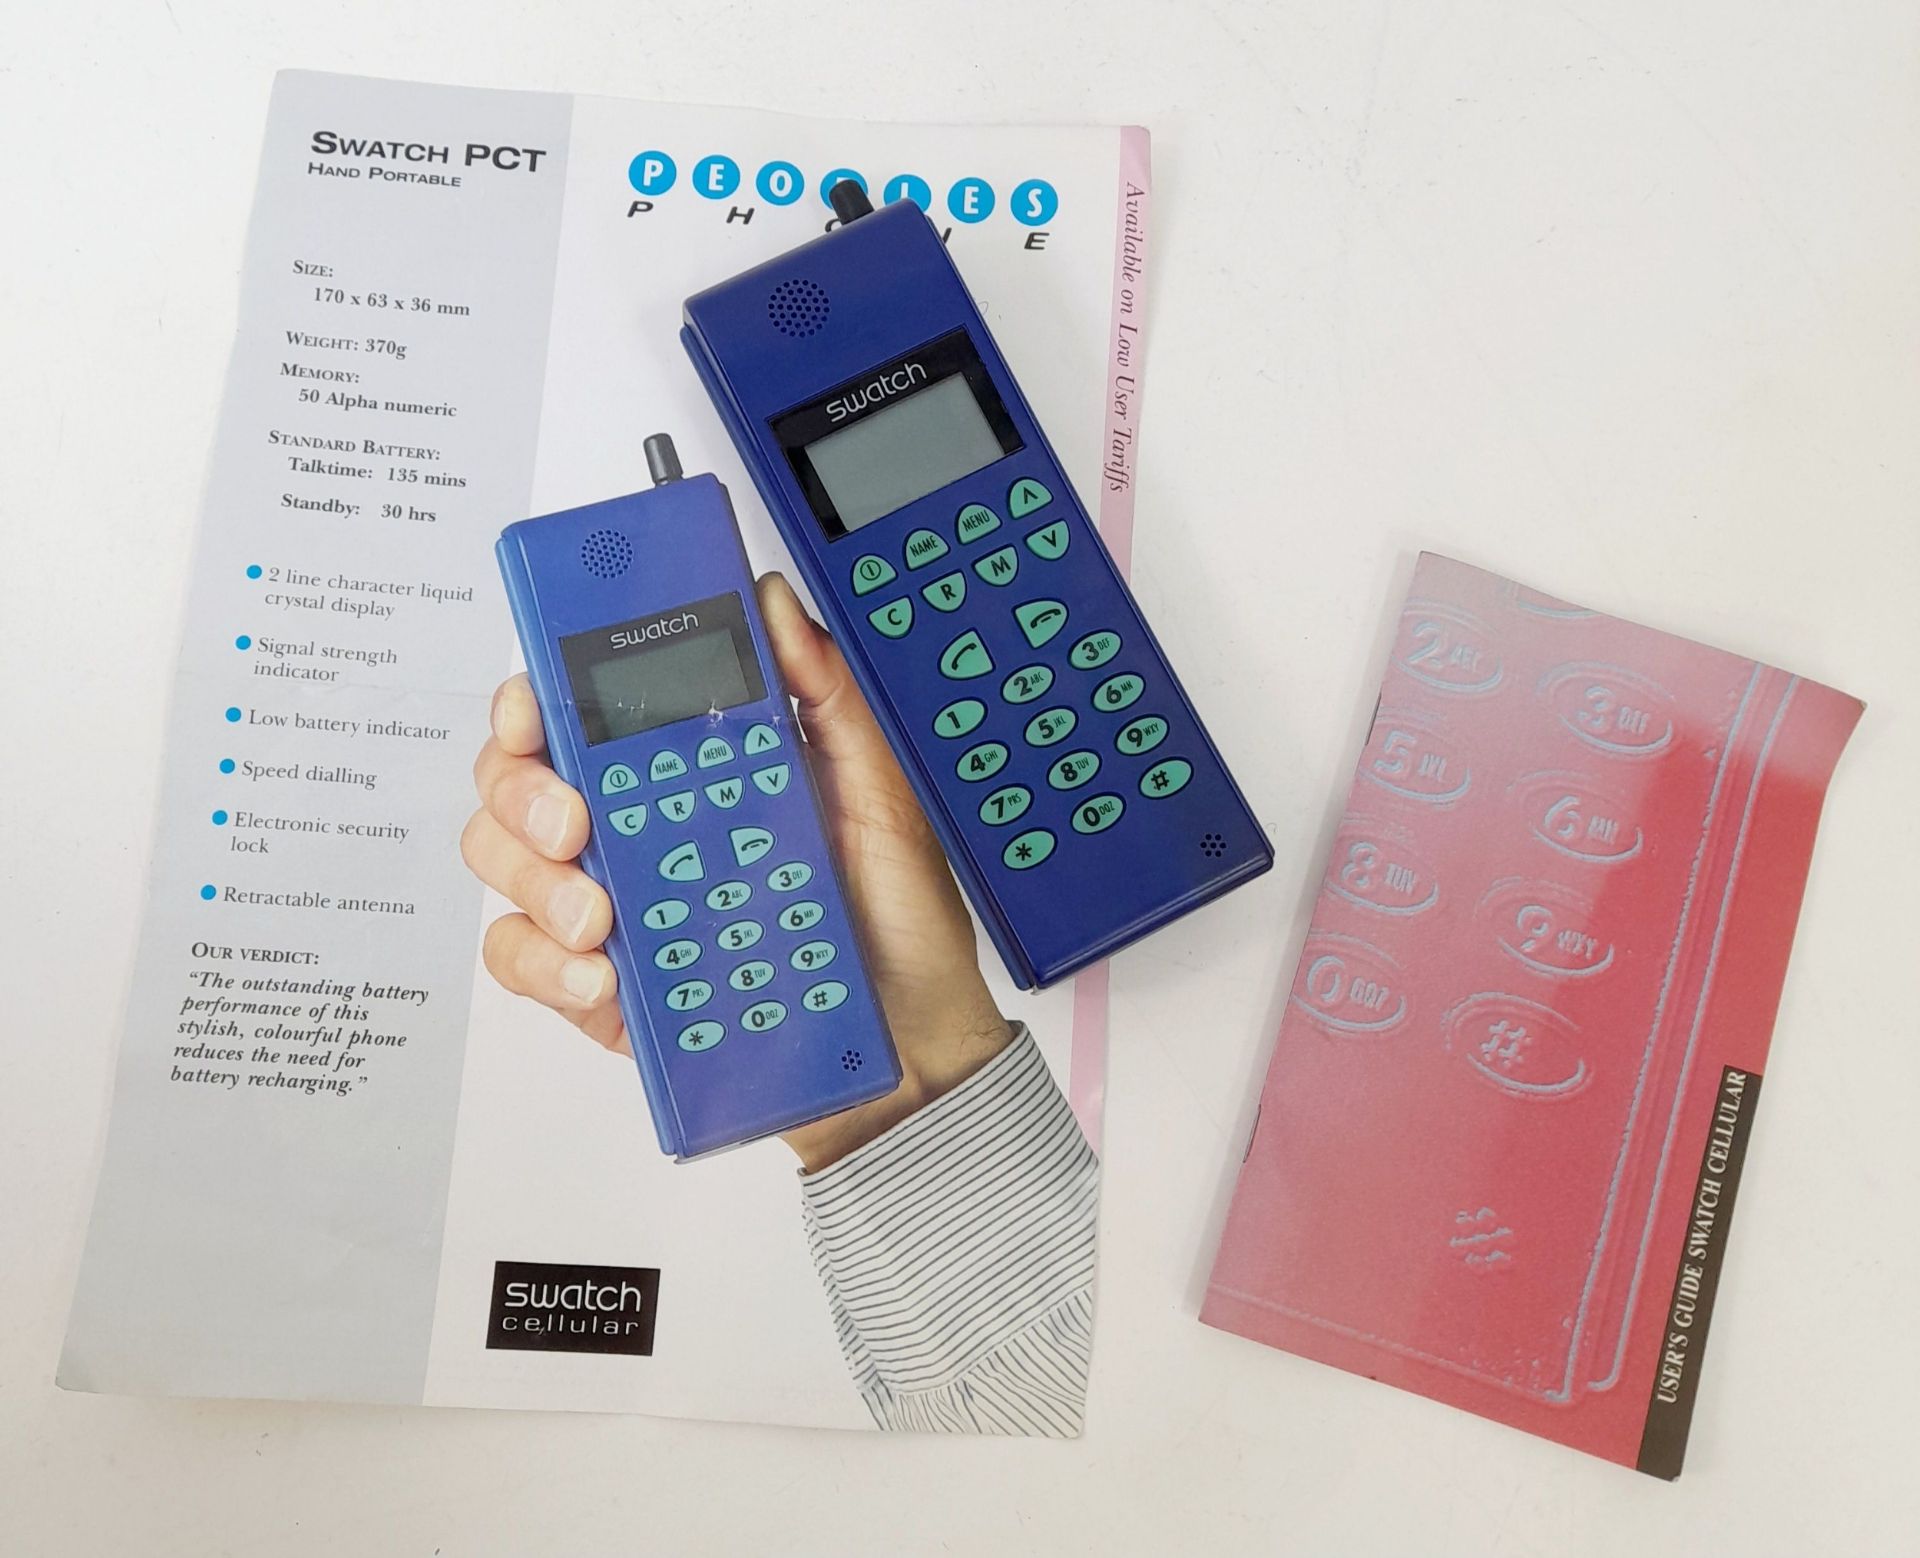 A Vintage Swatch PCT Large Blue Mobile Phone. Comes with paperwork.